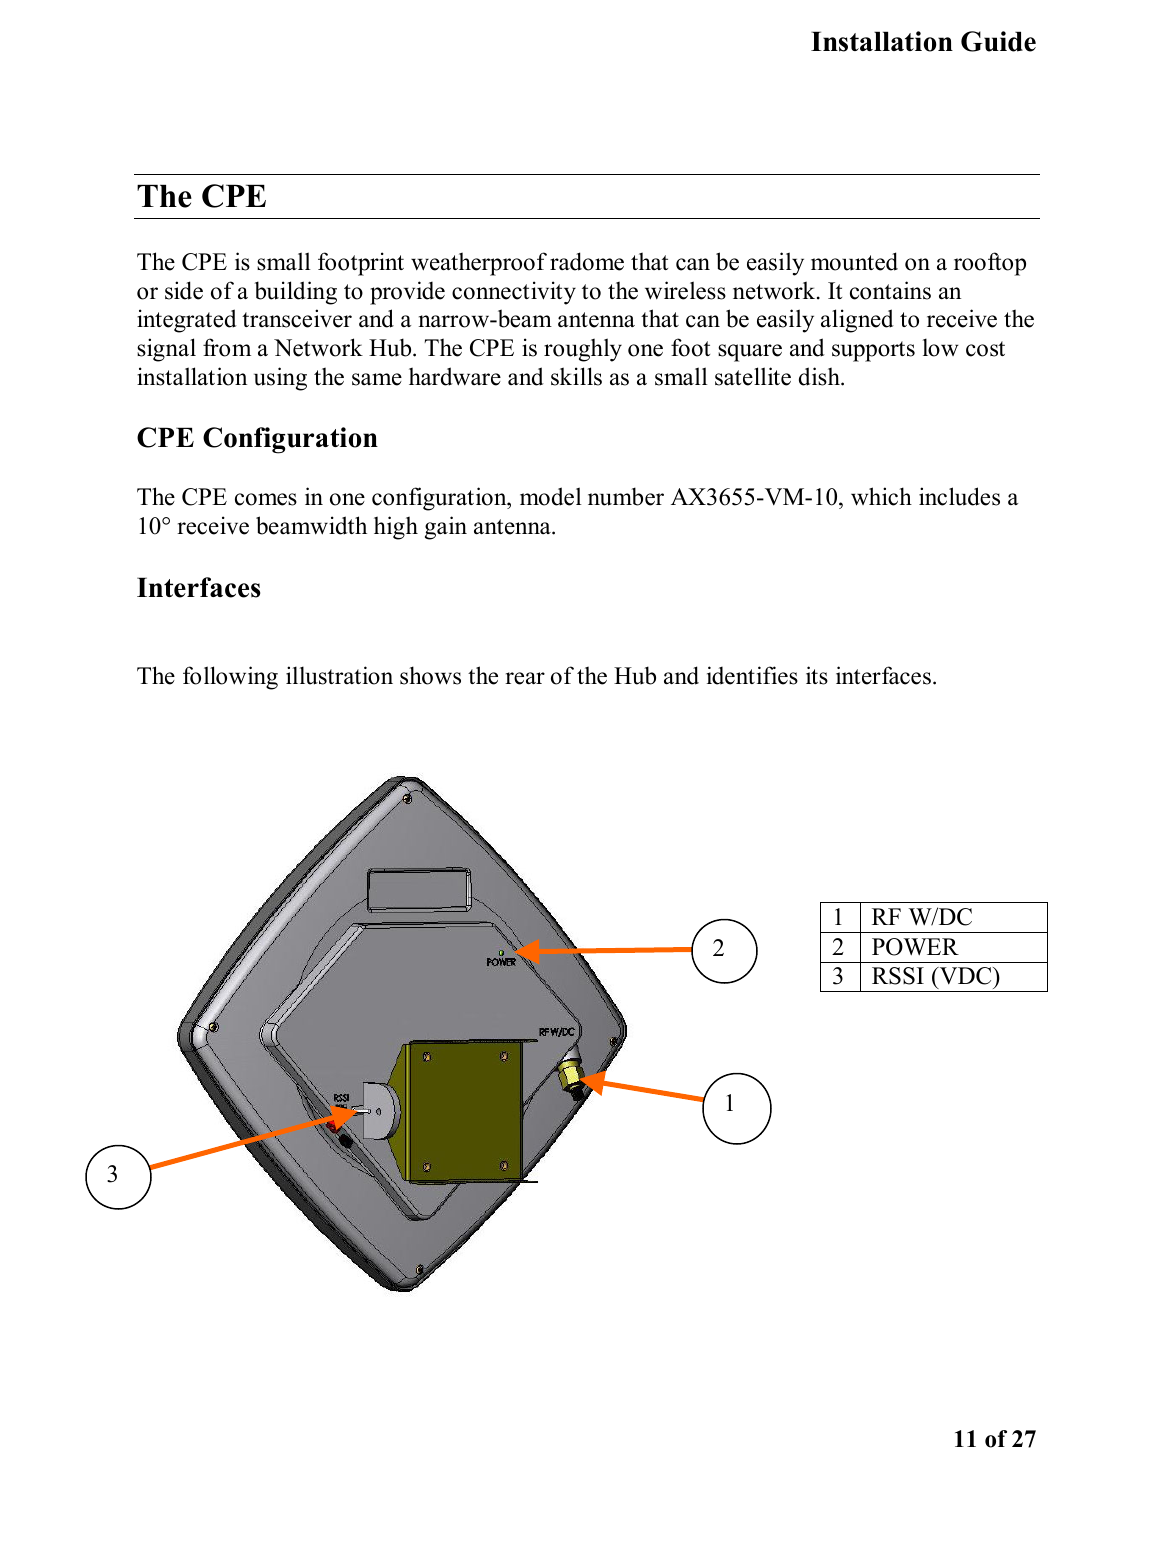   Installation Guide    11 of 27  The CPE The CPE is small footprint weatherproof radome that can be easily mounted on a rooftop or side of a building to provide connectivity to the wireless network. It contains an integrated transceiver and a narrow-beam antenna that can be easily aligned to receive the signal from a Network Hub. The CPE is roughly one foot square and supports low cost installation using the same hardware and skills as a small satellite dish.  CPE Configuration  The CPE comes in one configuration, model number AX3655-VM-10, which includes a 10° receive beamwidth high gain antenna.  Interfaces The following illustration shows the rear of the Hub and identifies its interfaces.  1 RF W/DC 2 POWER 3 RSSI (VDC) 2 3 1 